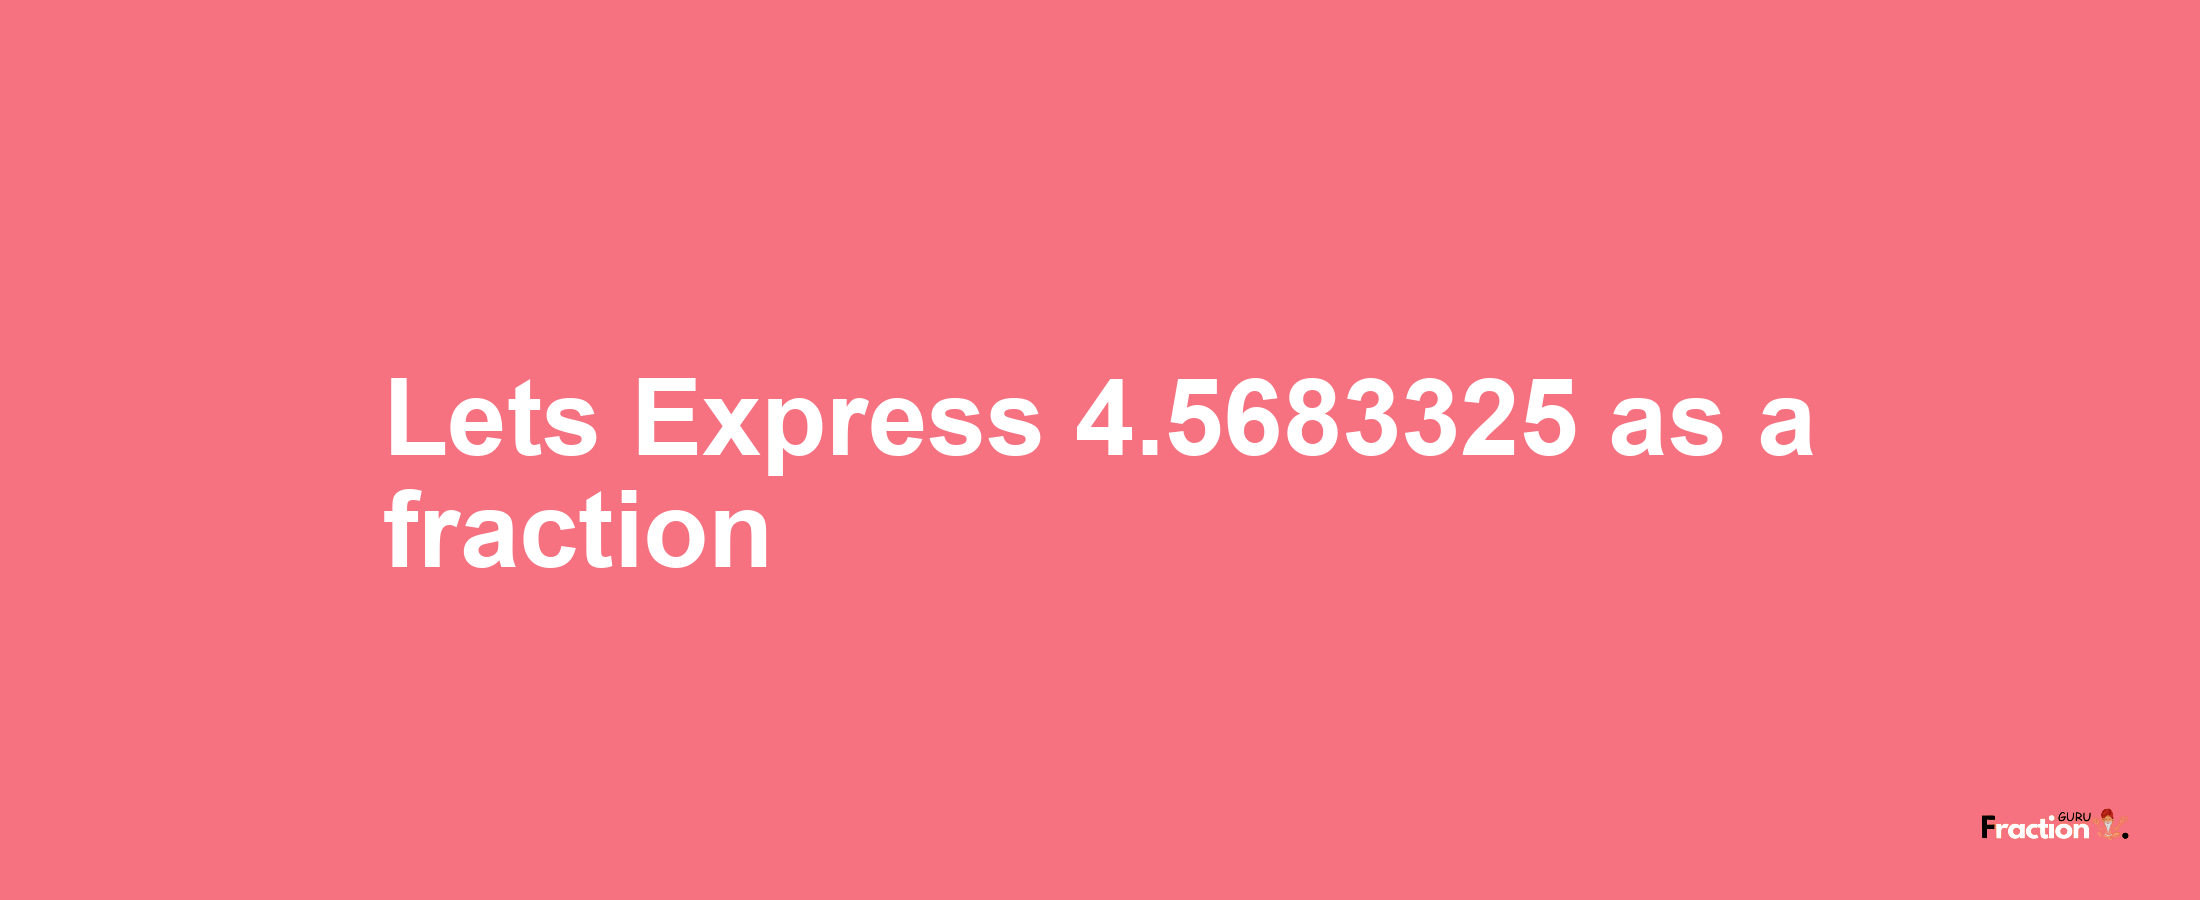 Lets Express 4.5683325 as afraction